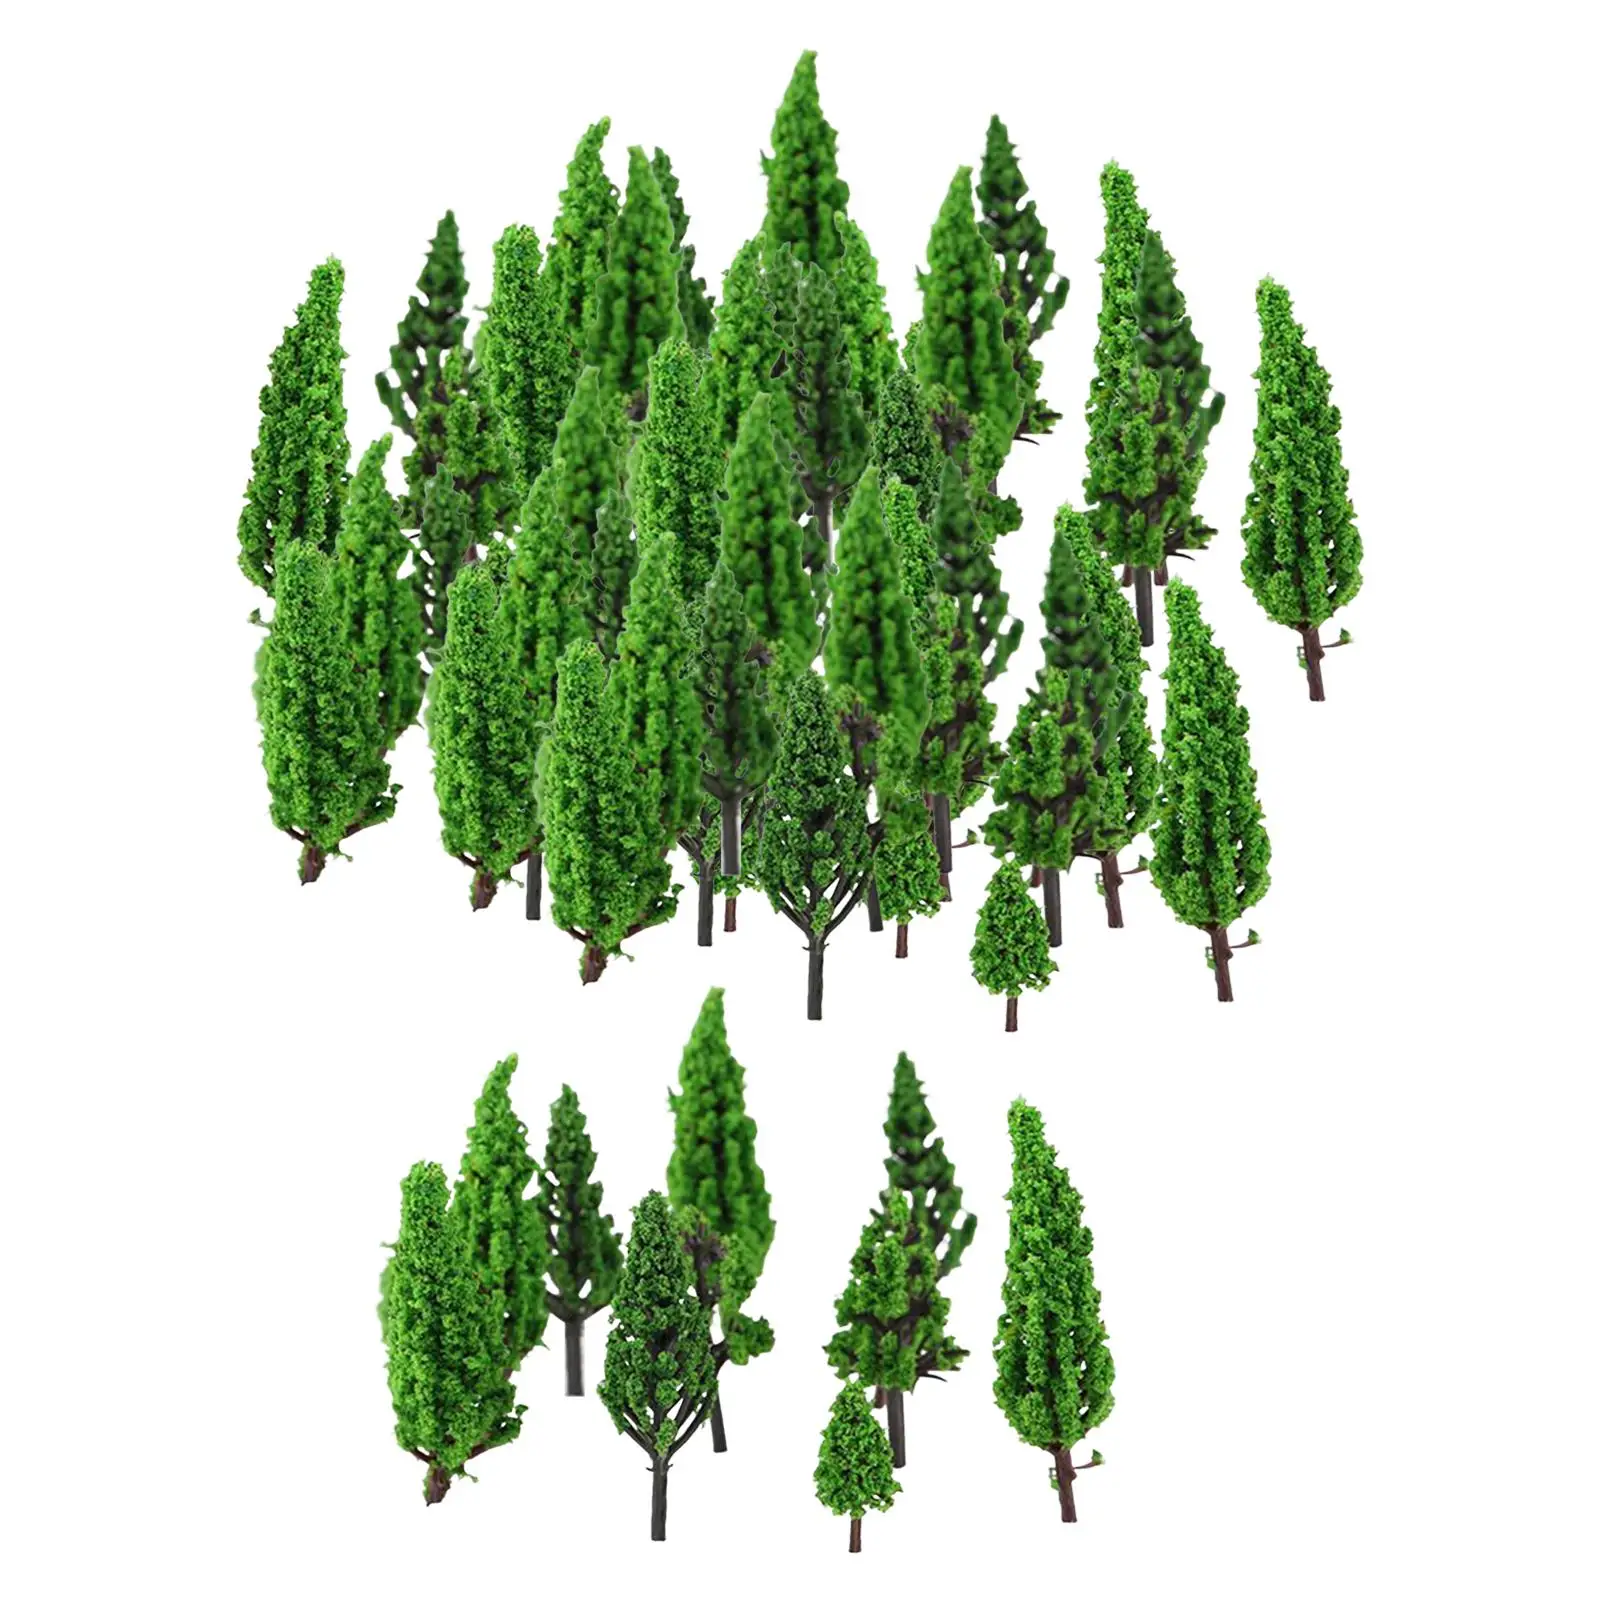 50 Pieces Realistic Scenery Tree Train Scenery Mixed Miniature Trees for Model Train Sand Table Architecture Landscape Diorama